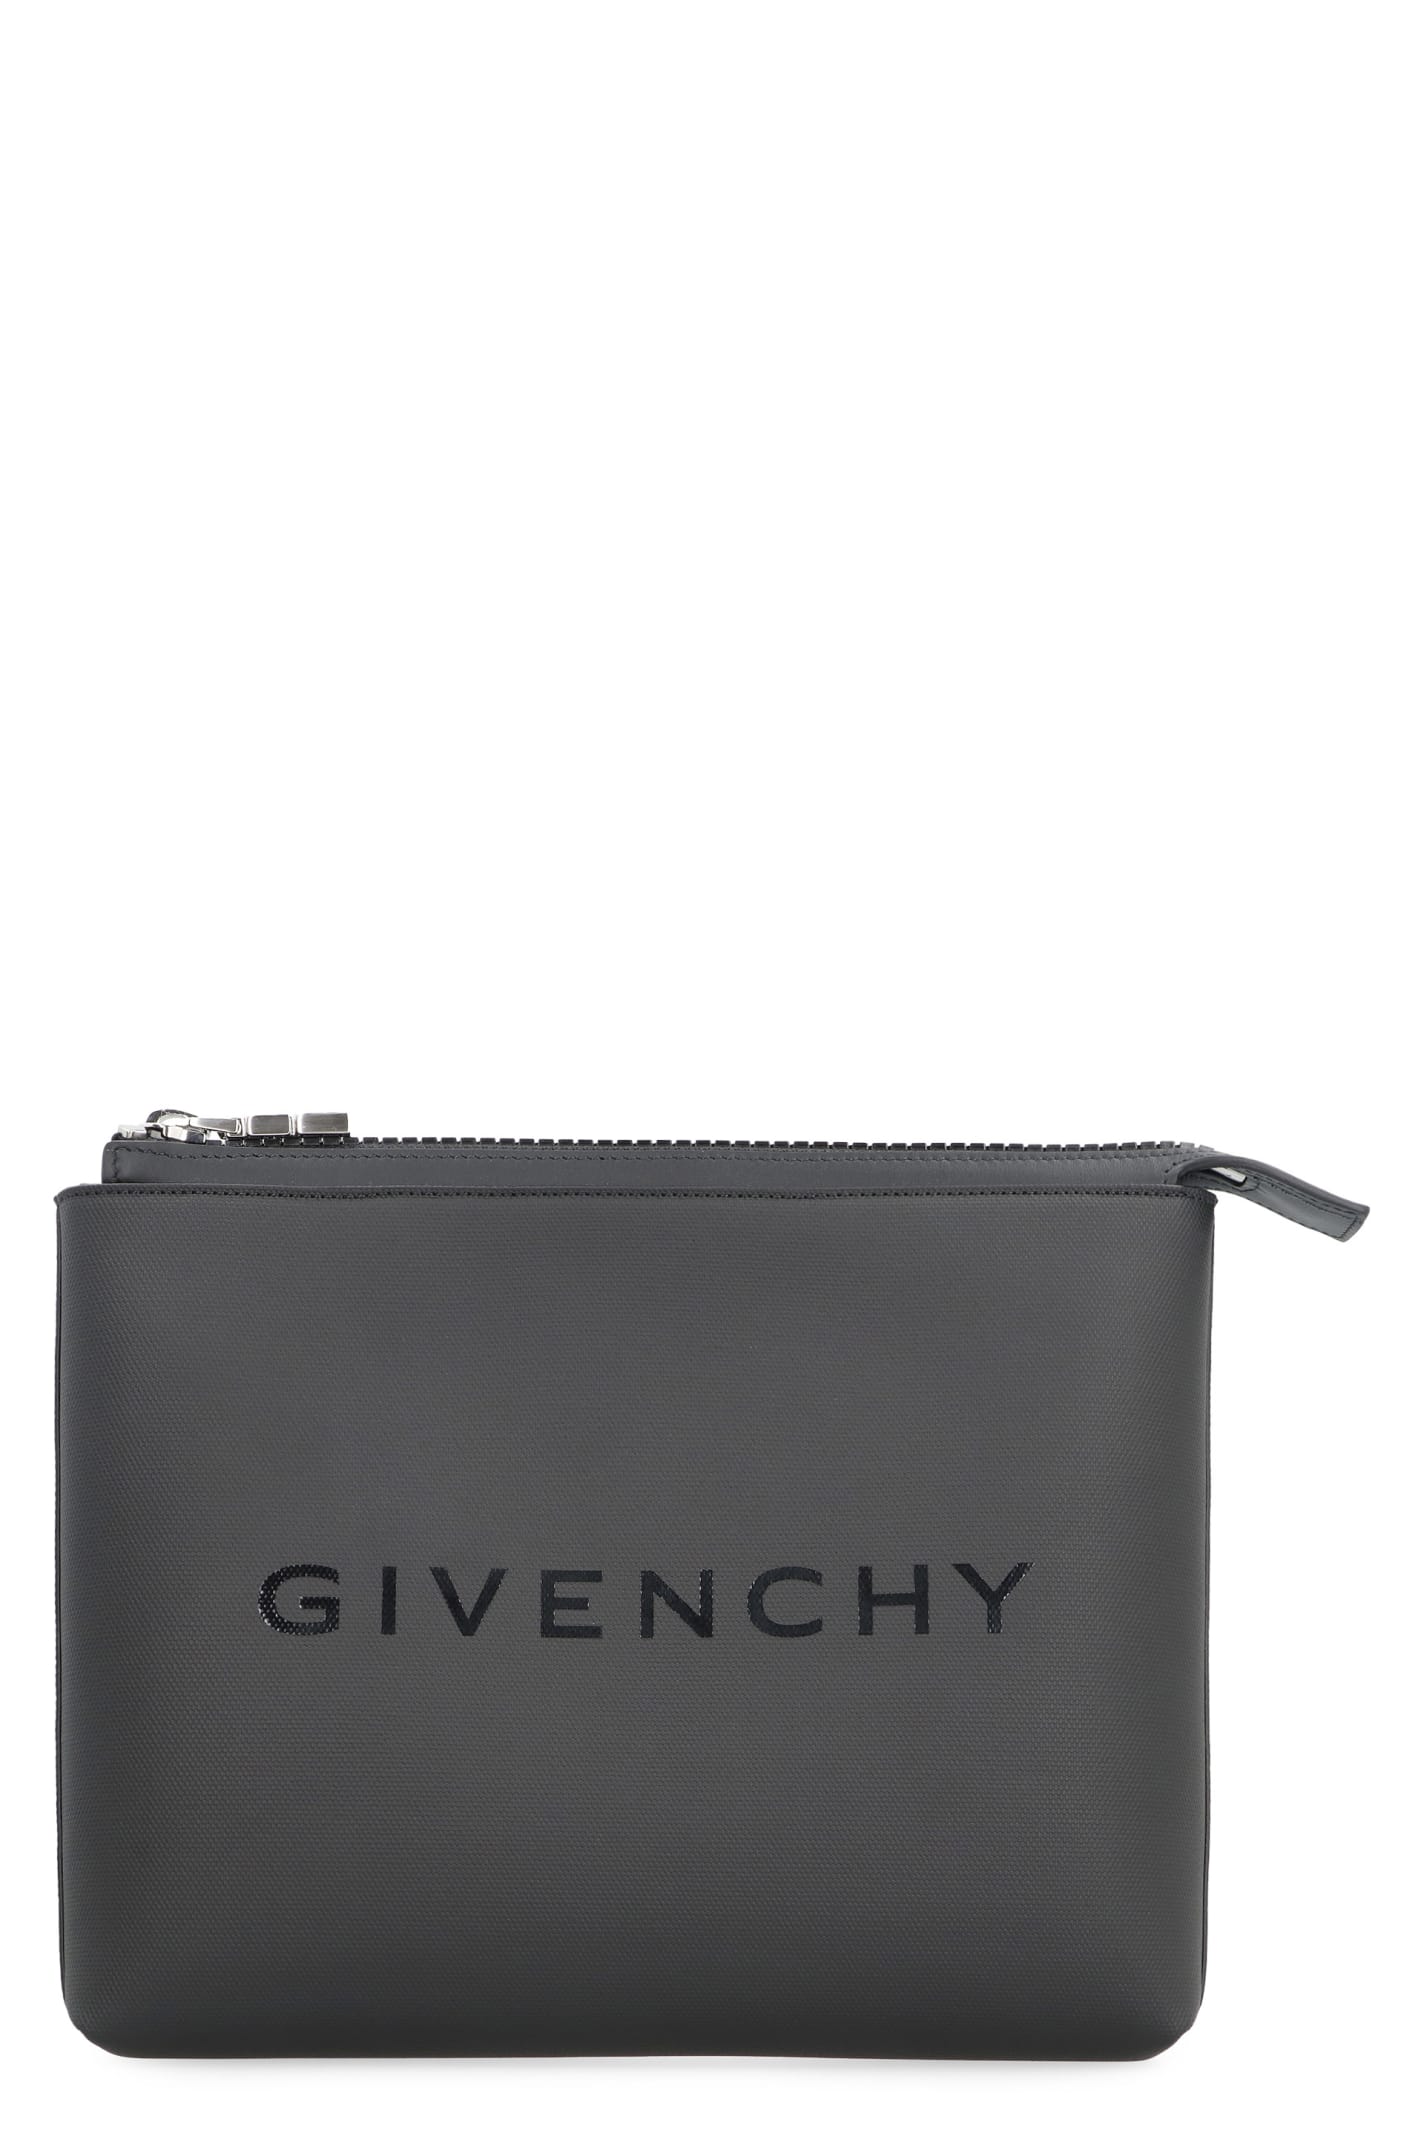 Givenchy Coated Canvas Flat Pouch In Black